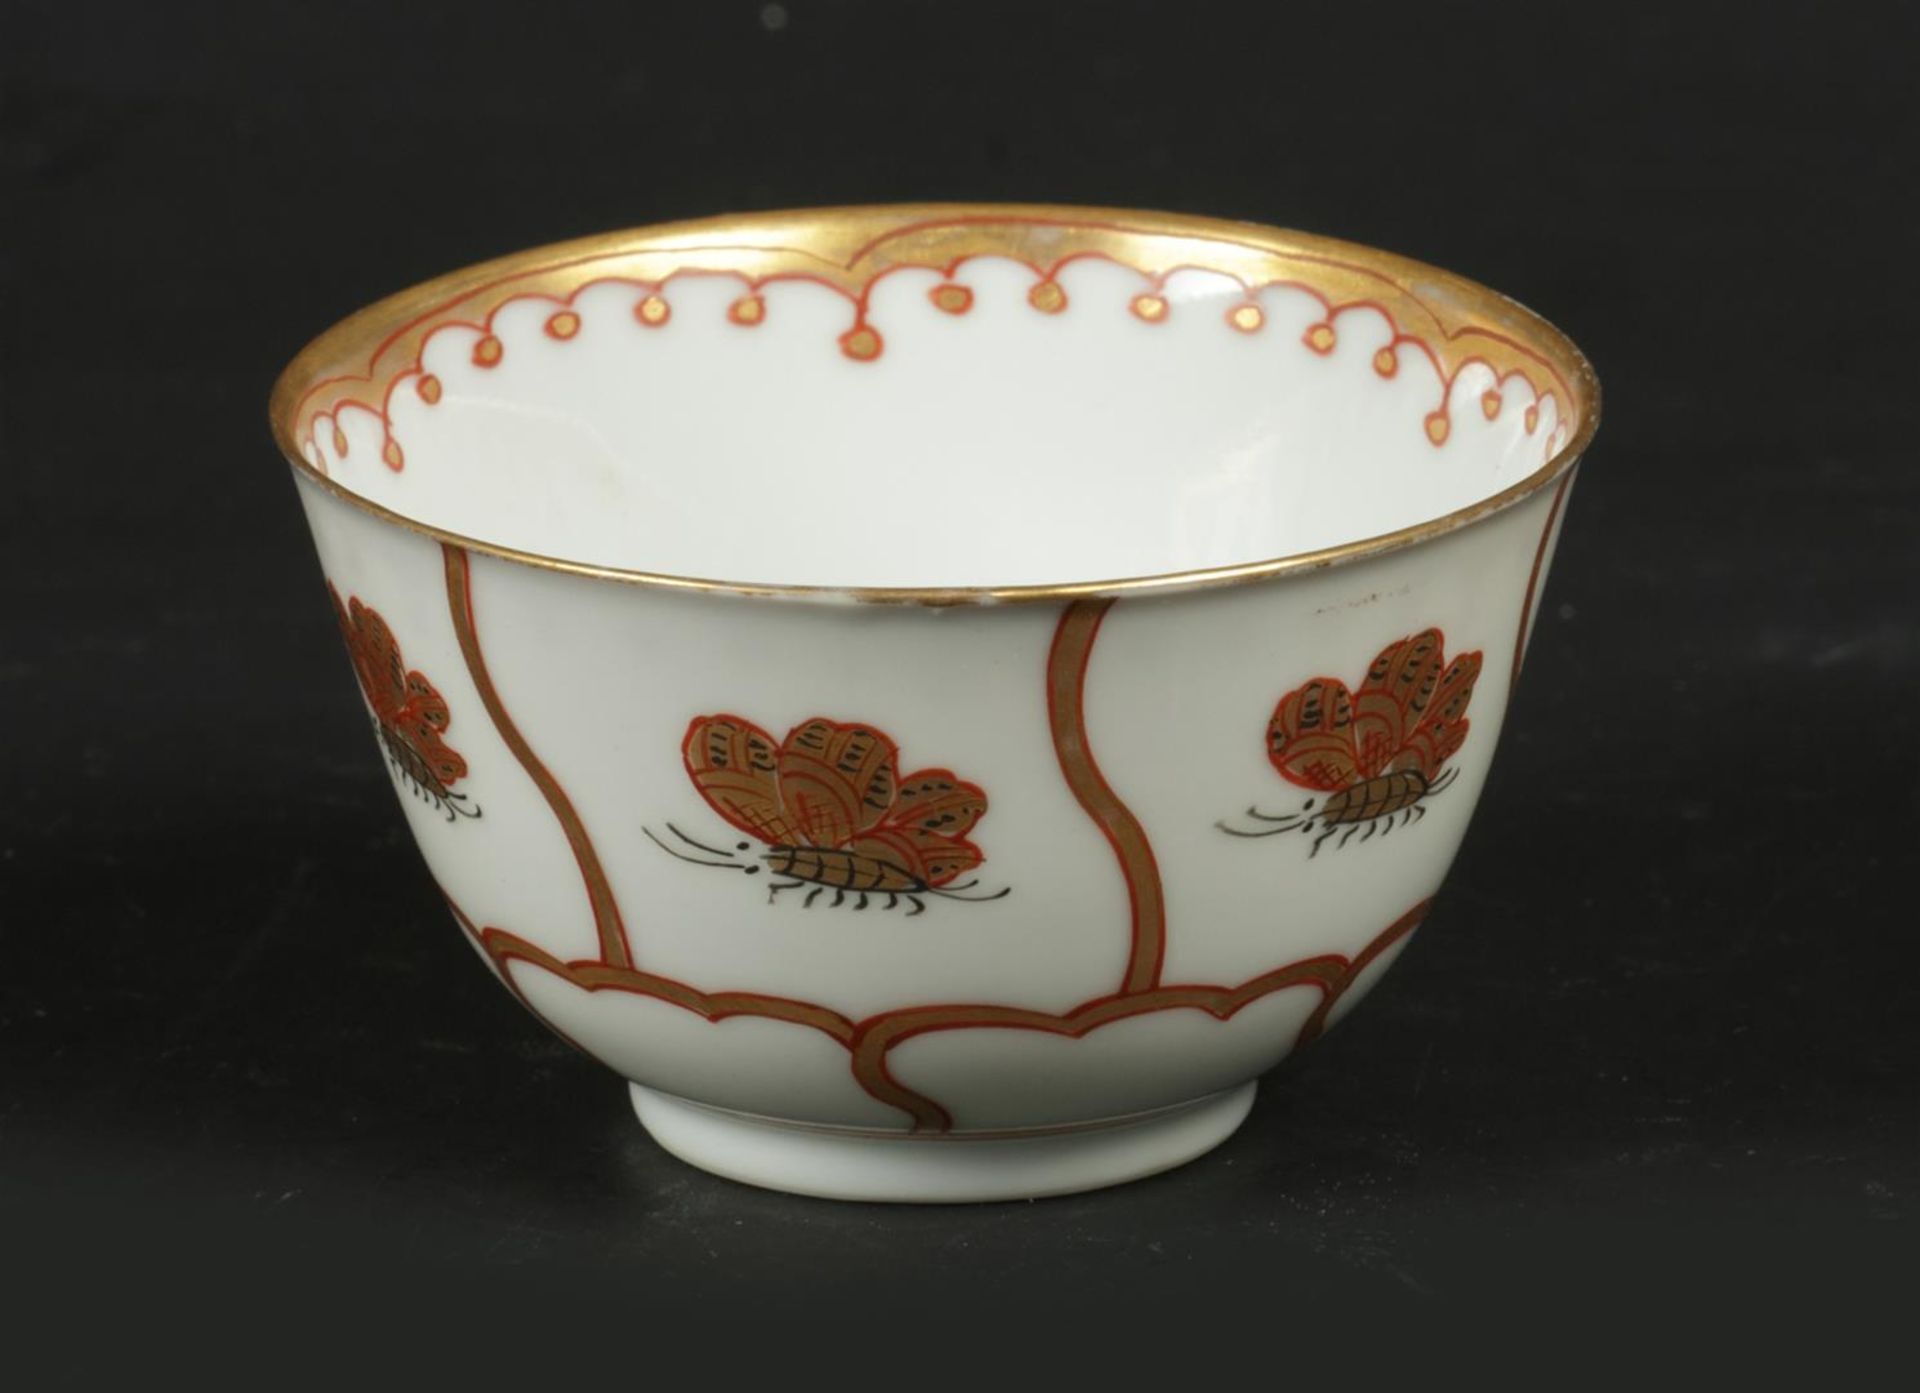 A porcelain cup with a gilded flowerbed decoration with but